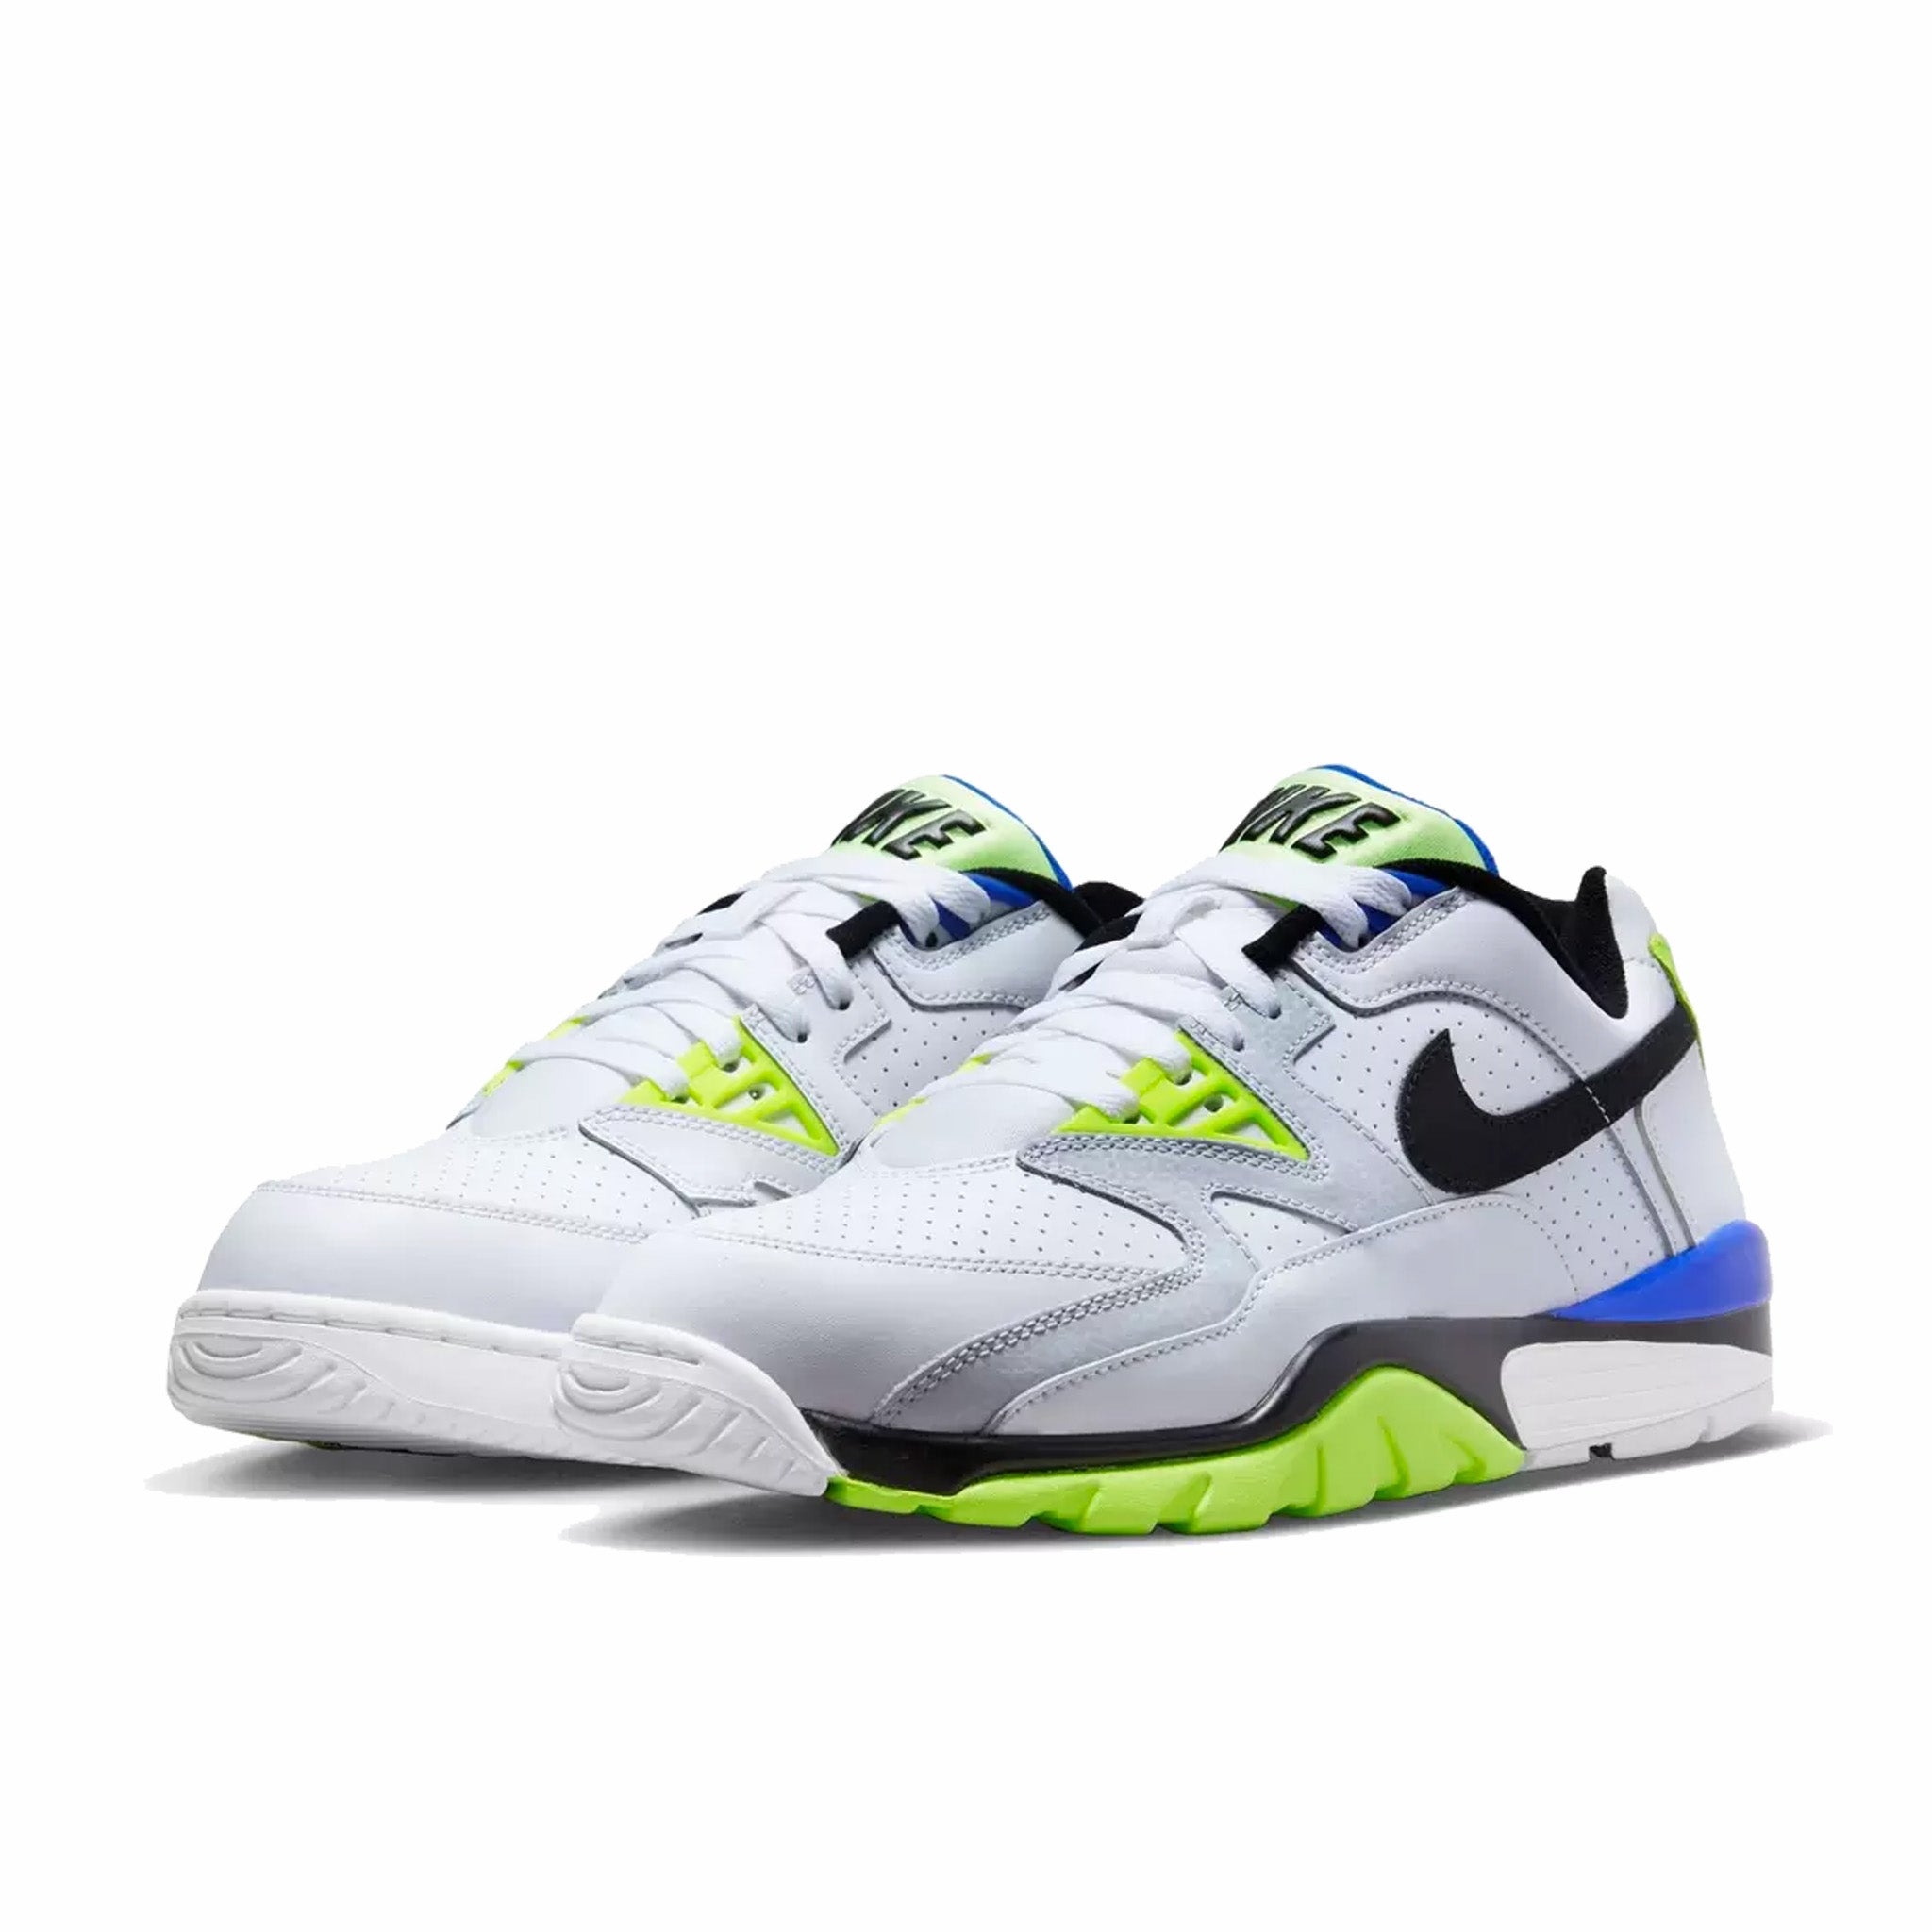 Nike Air Trainer Low (White/Black-Pure Platinum-Racer Blue) August